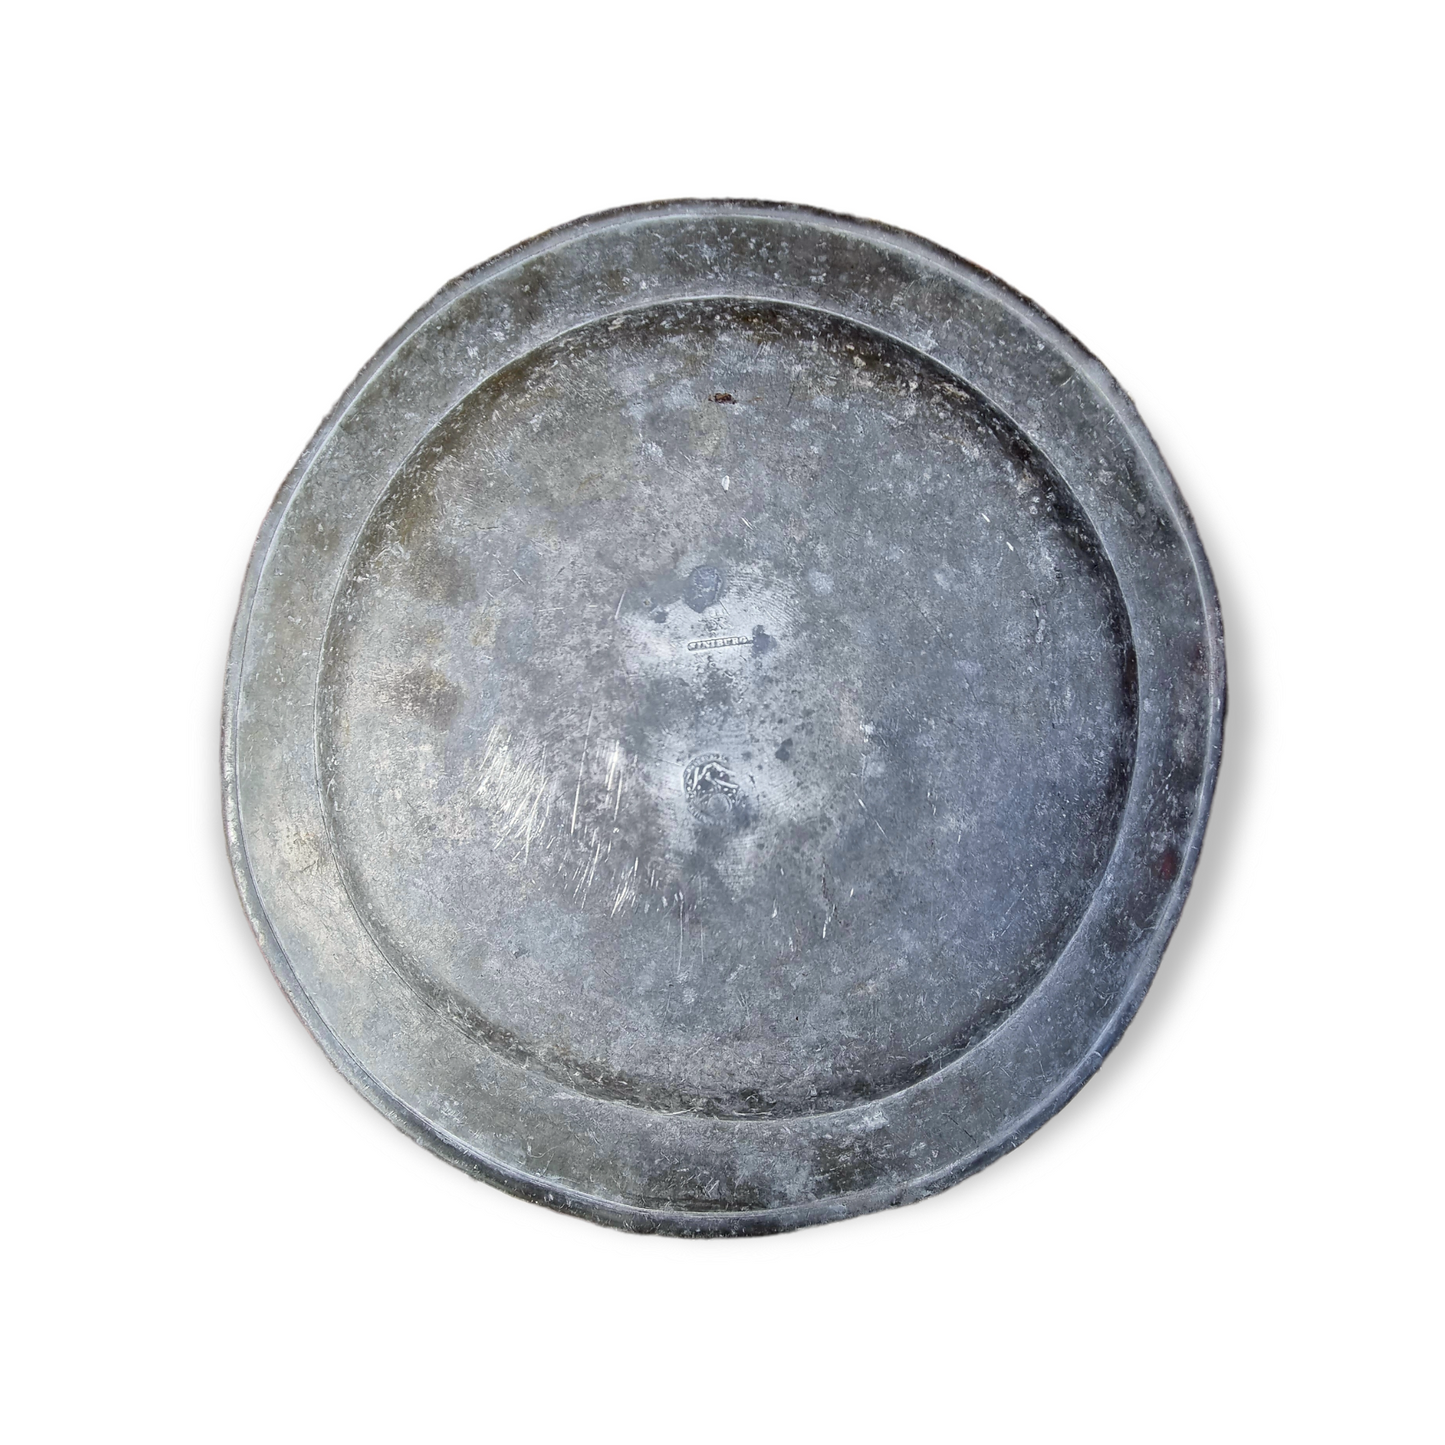 Robert Kinniburgh of Edinburgh - Early 19th Century Scottish Antique Pewter Charger Inscribed "United Assote Congn Lasswade 1830"